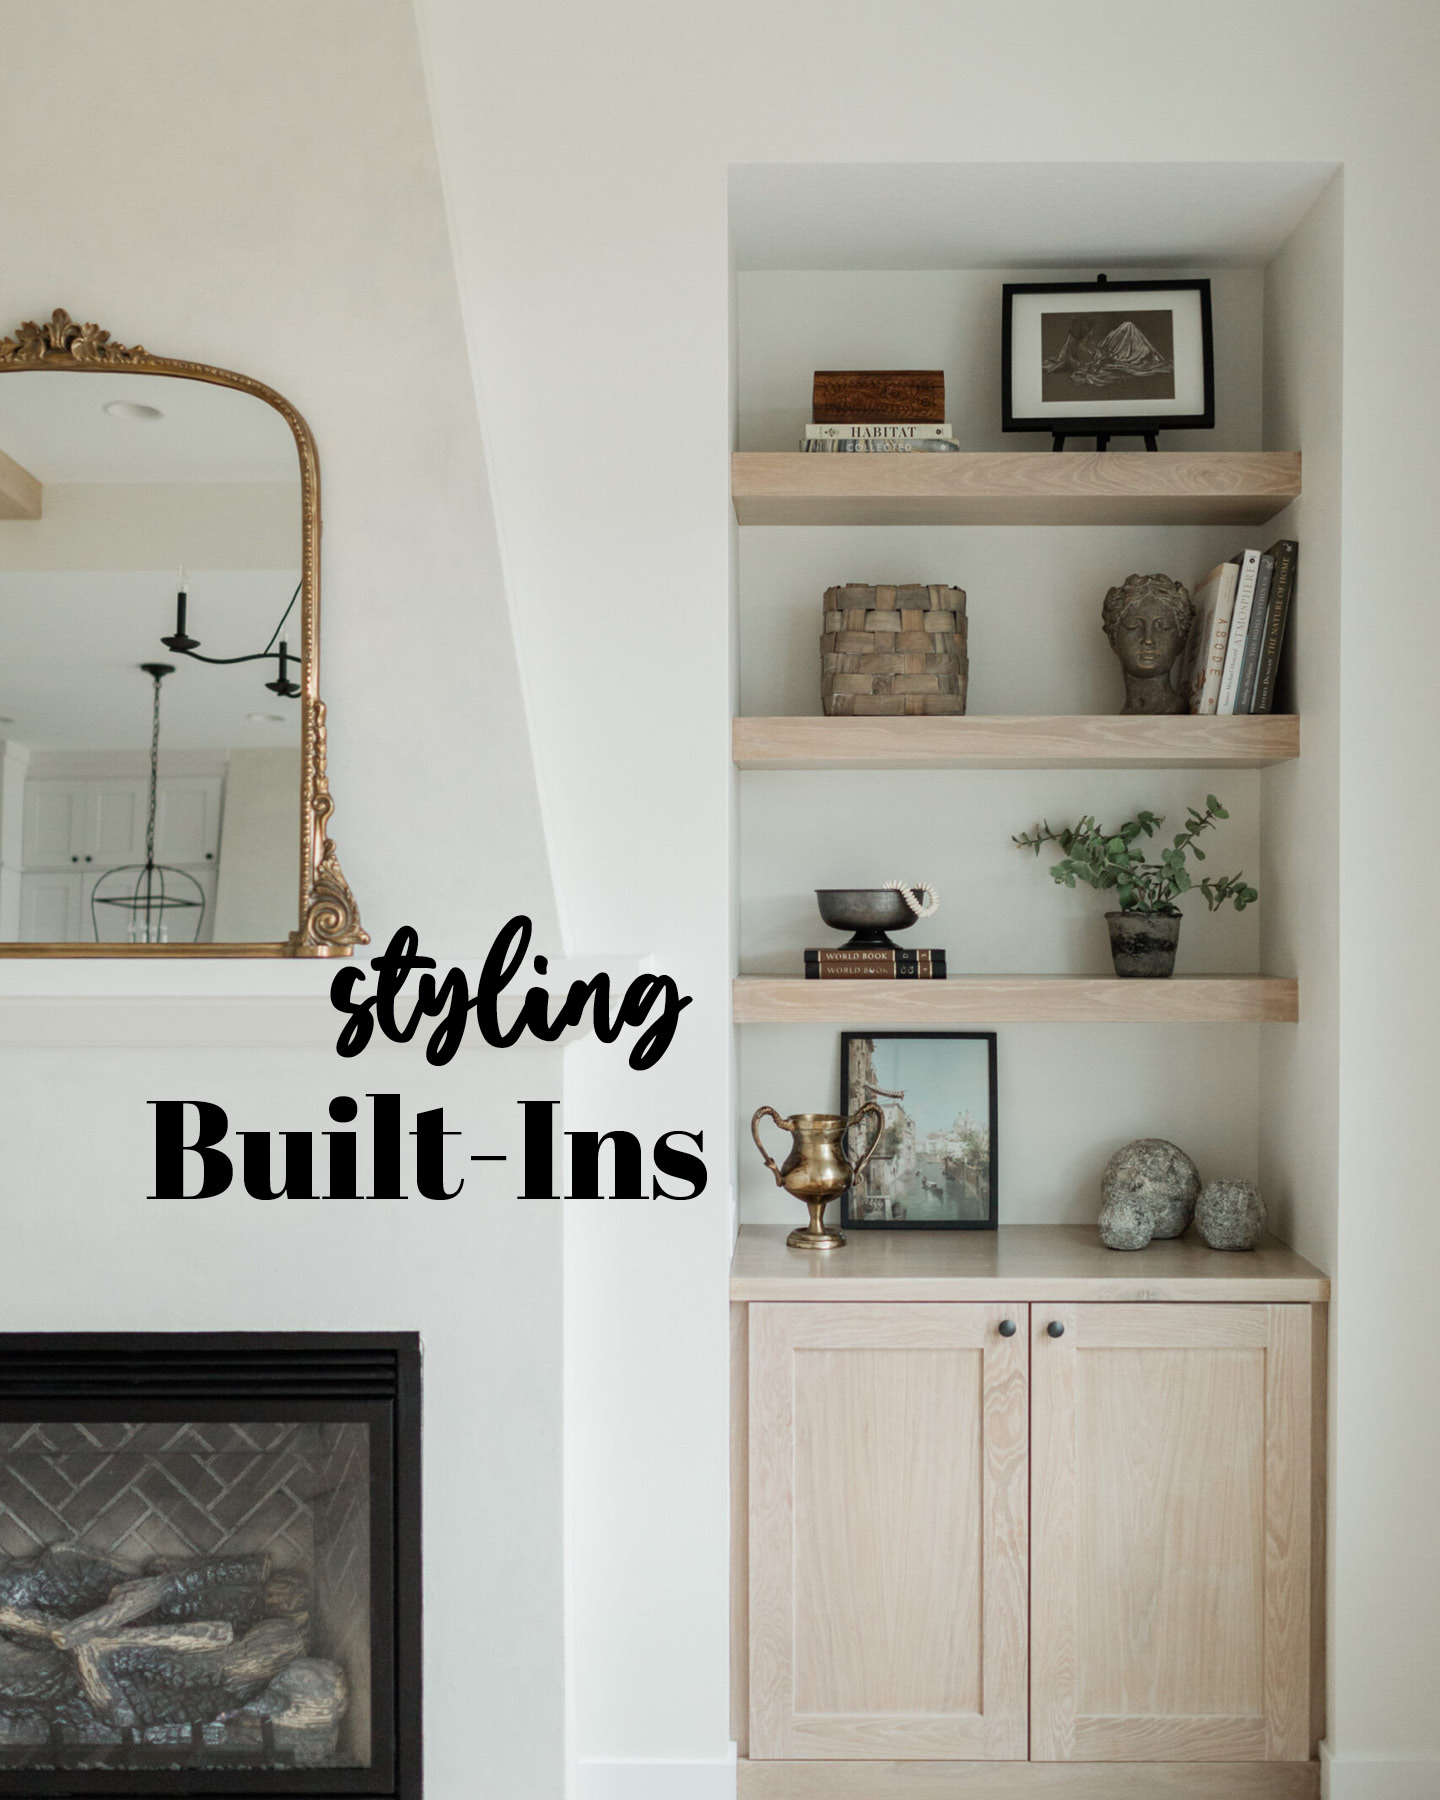 Styling Built - Ins